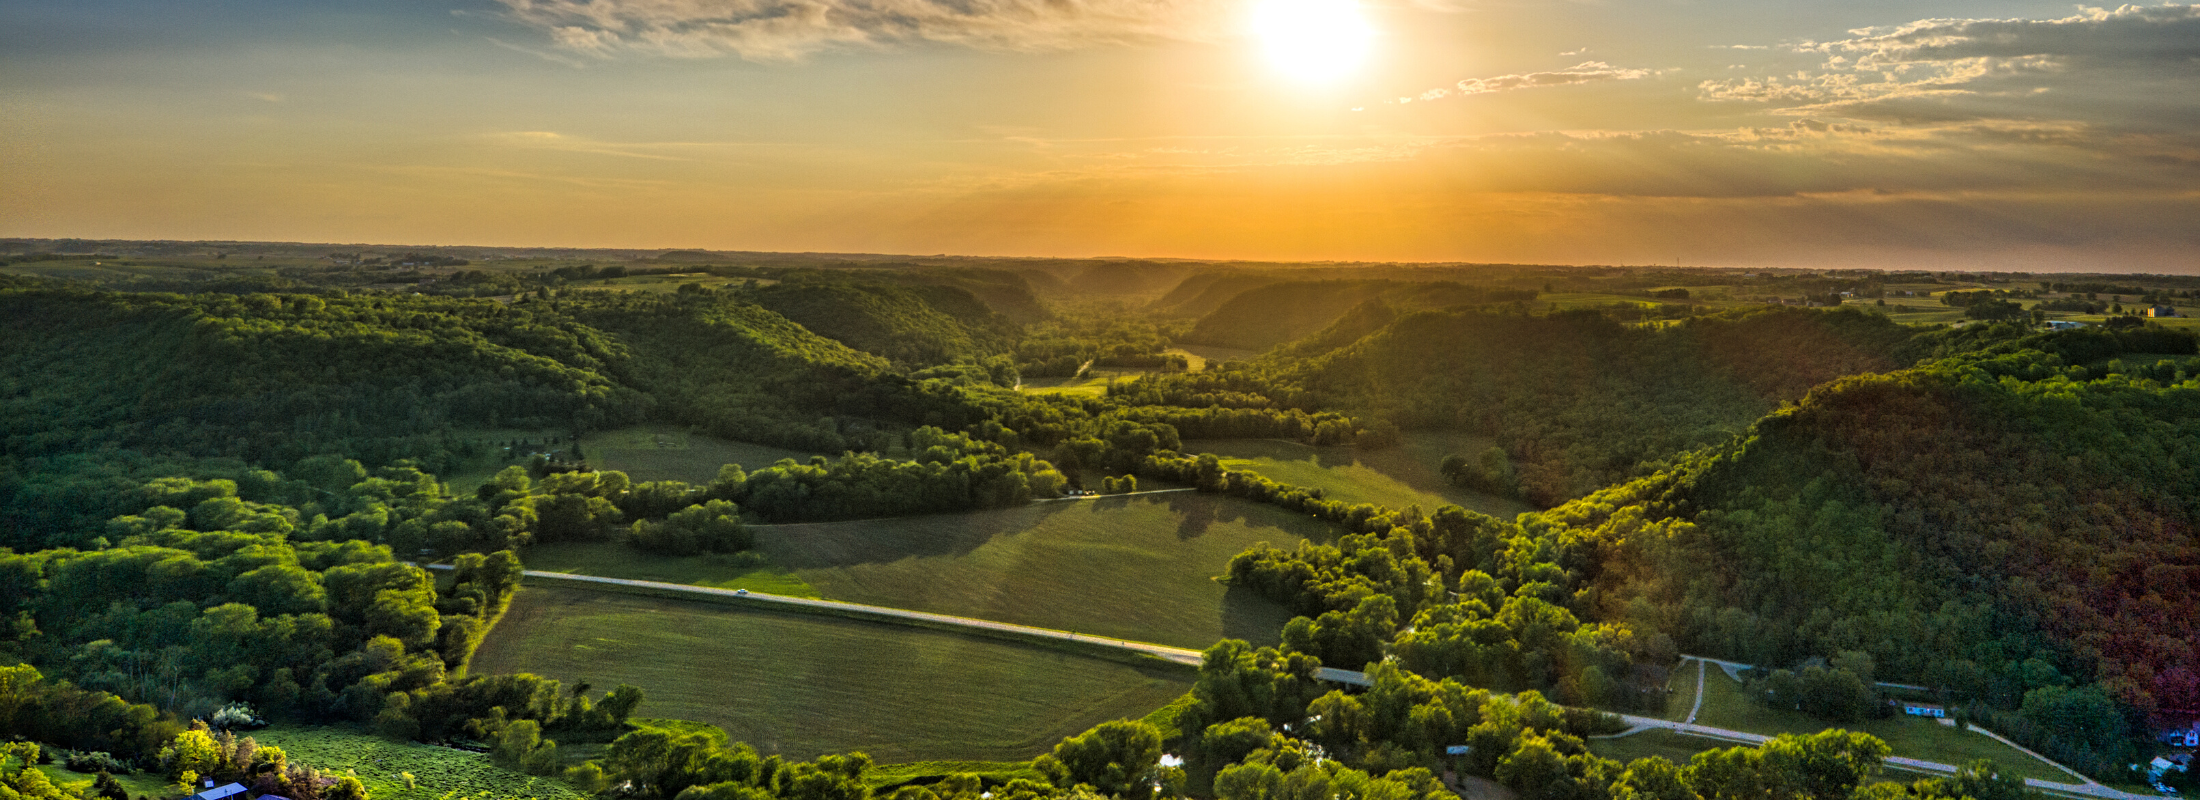 An aerial view of vast green nature and a sunrise